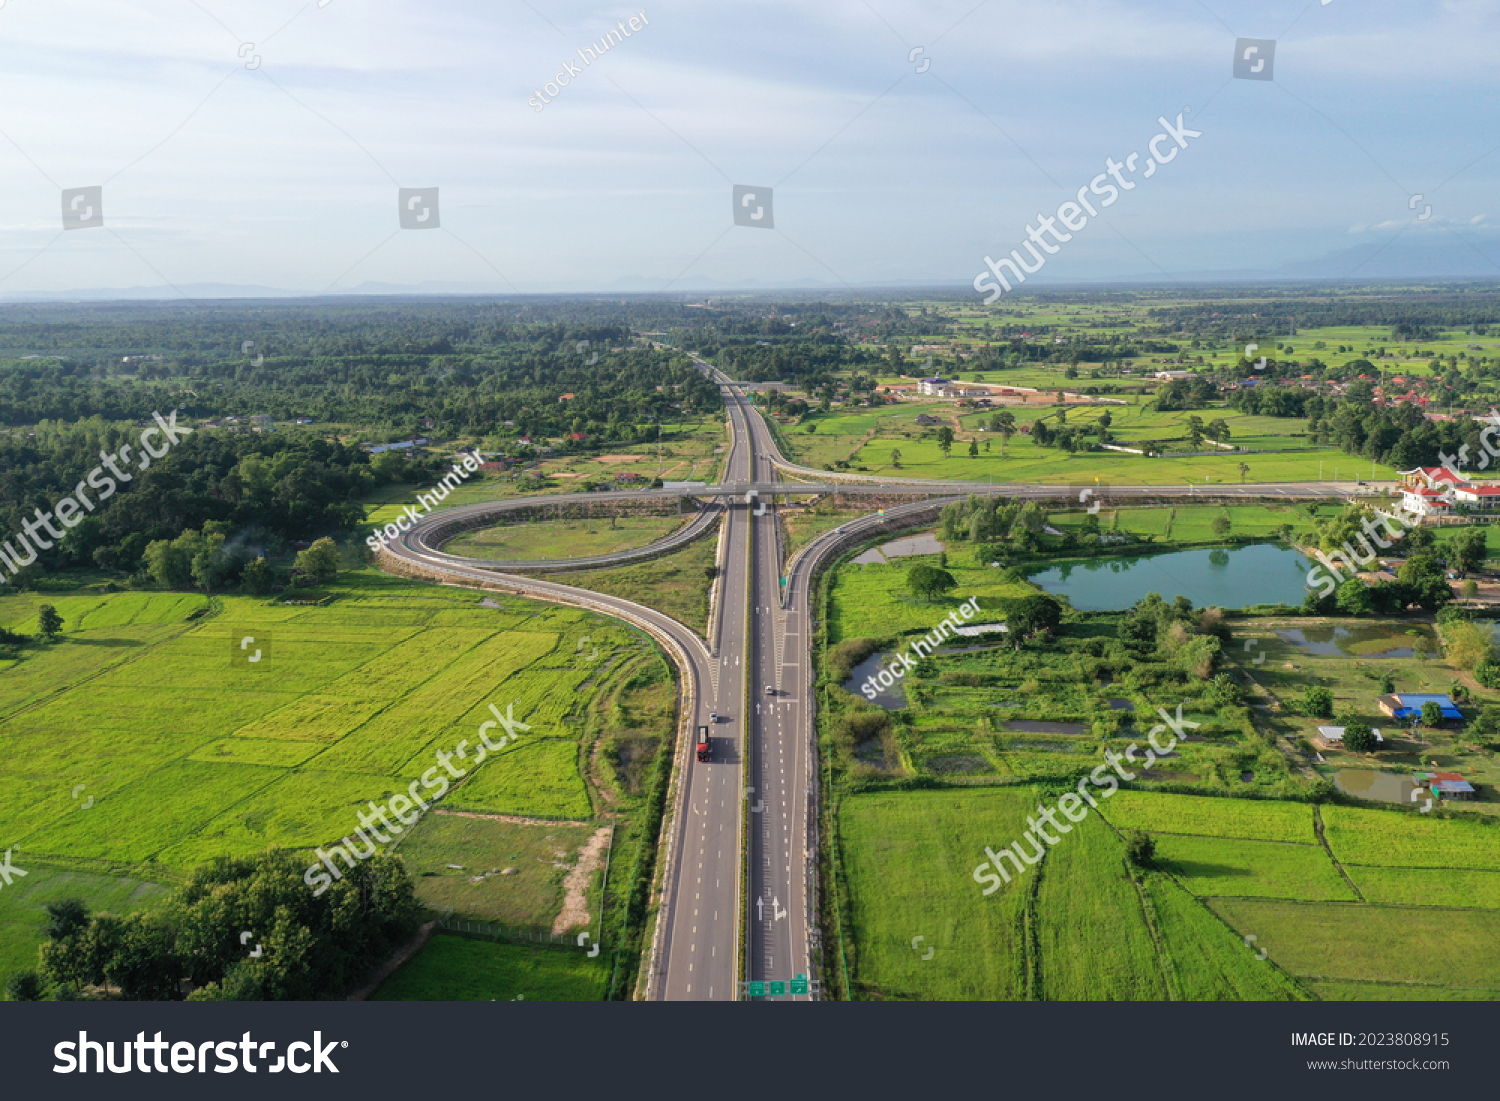 Aerial photo shows a view of the Vientiane-Vangvieng section of the China-Laos expressway in Vientiane, Laos #2023808915